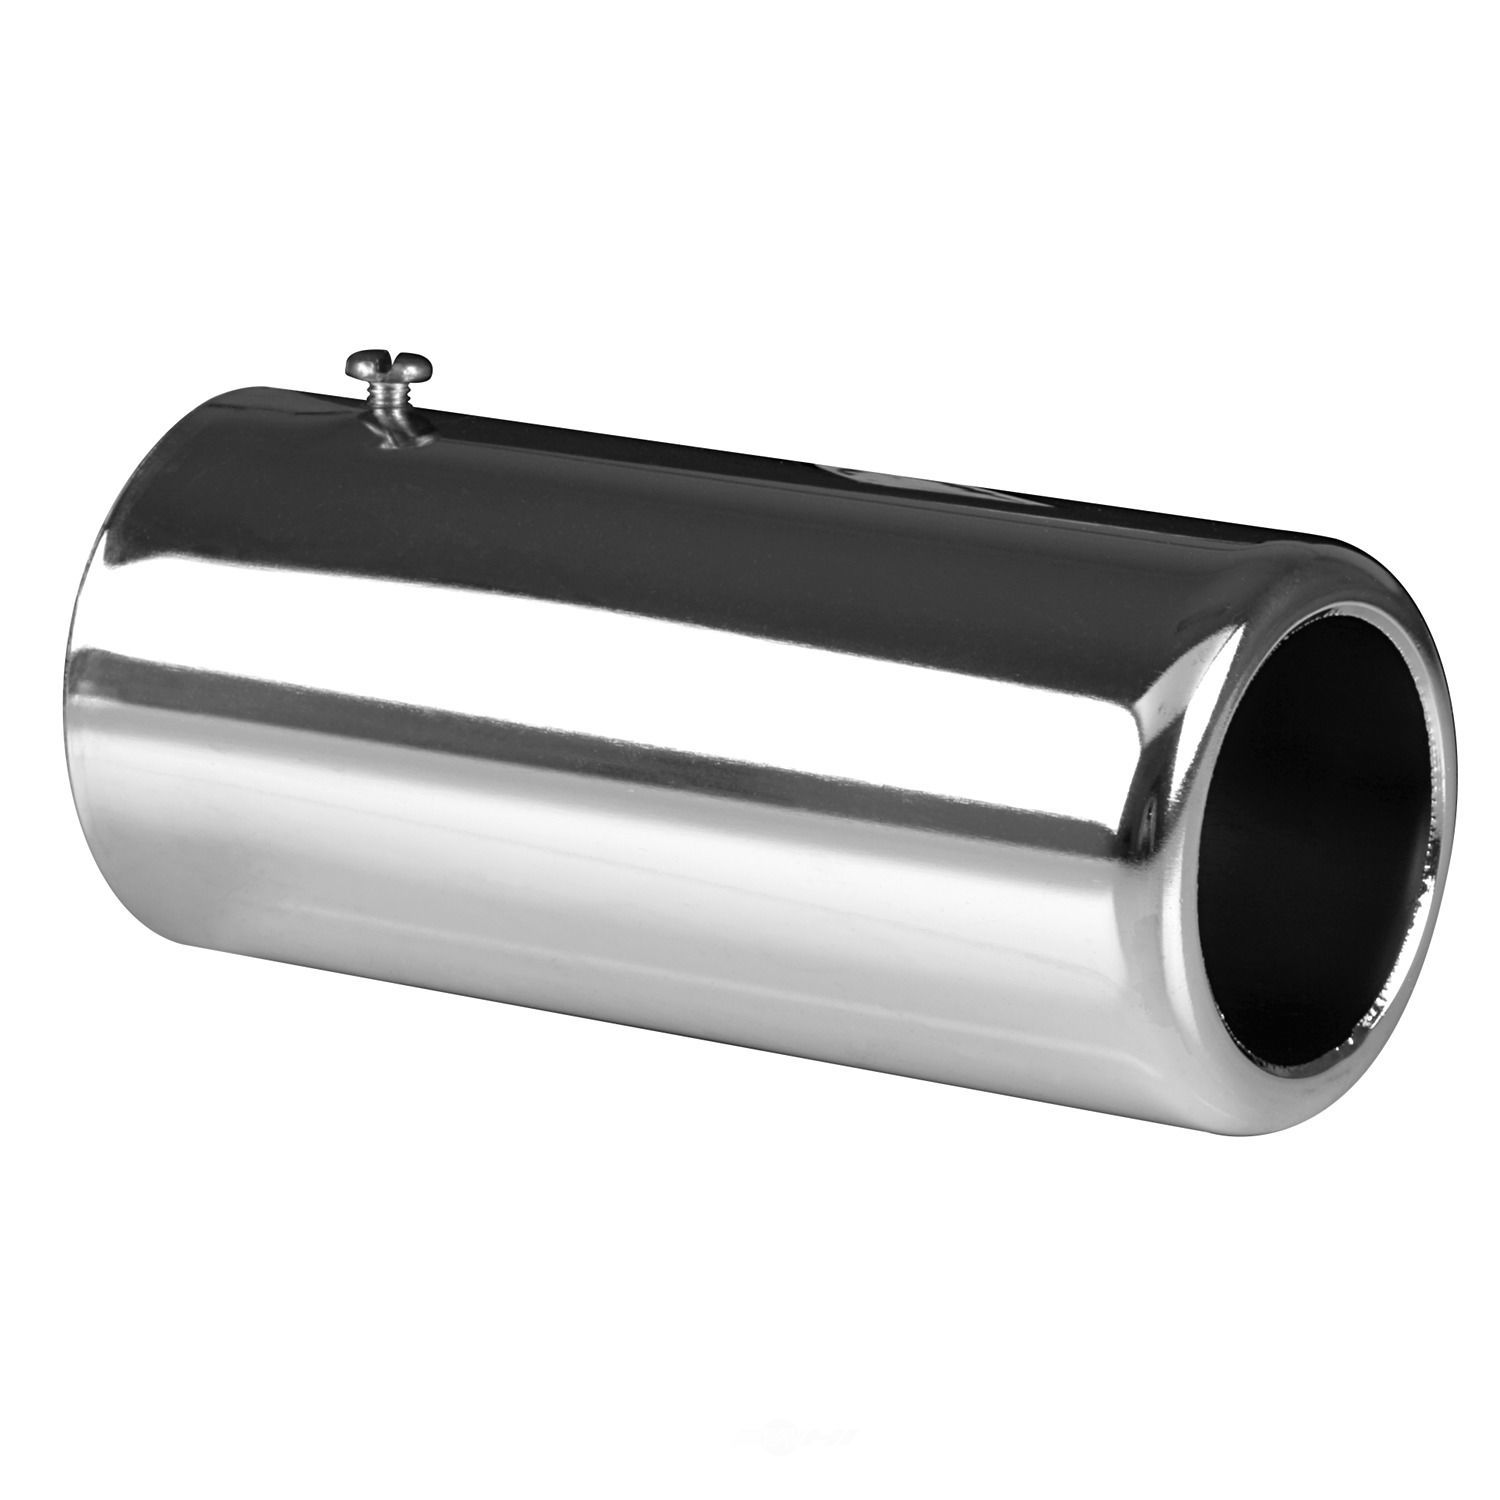 AP EXHAUST W/FEDERAL CONVERTER - Exhaust Tail Pipe Tip - APF 9821